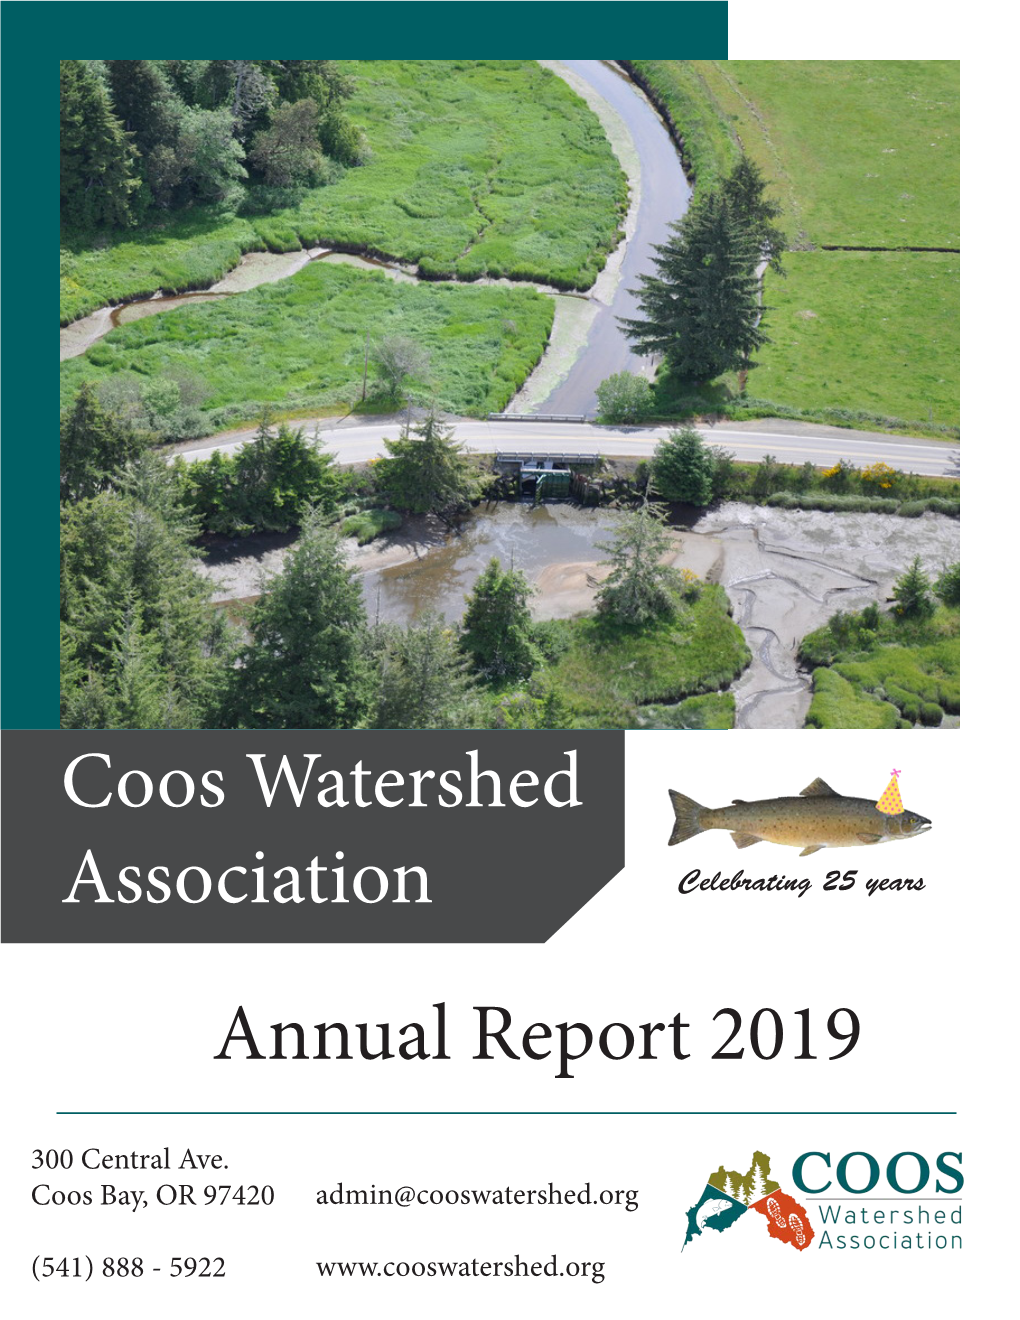 Coos Watershed Association Annual Report 2019